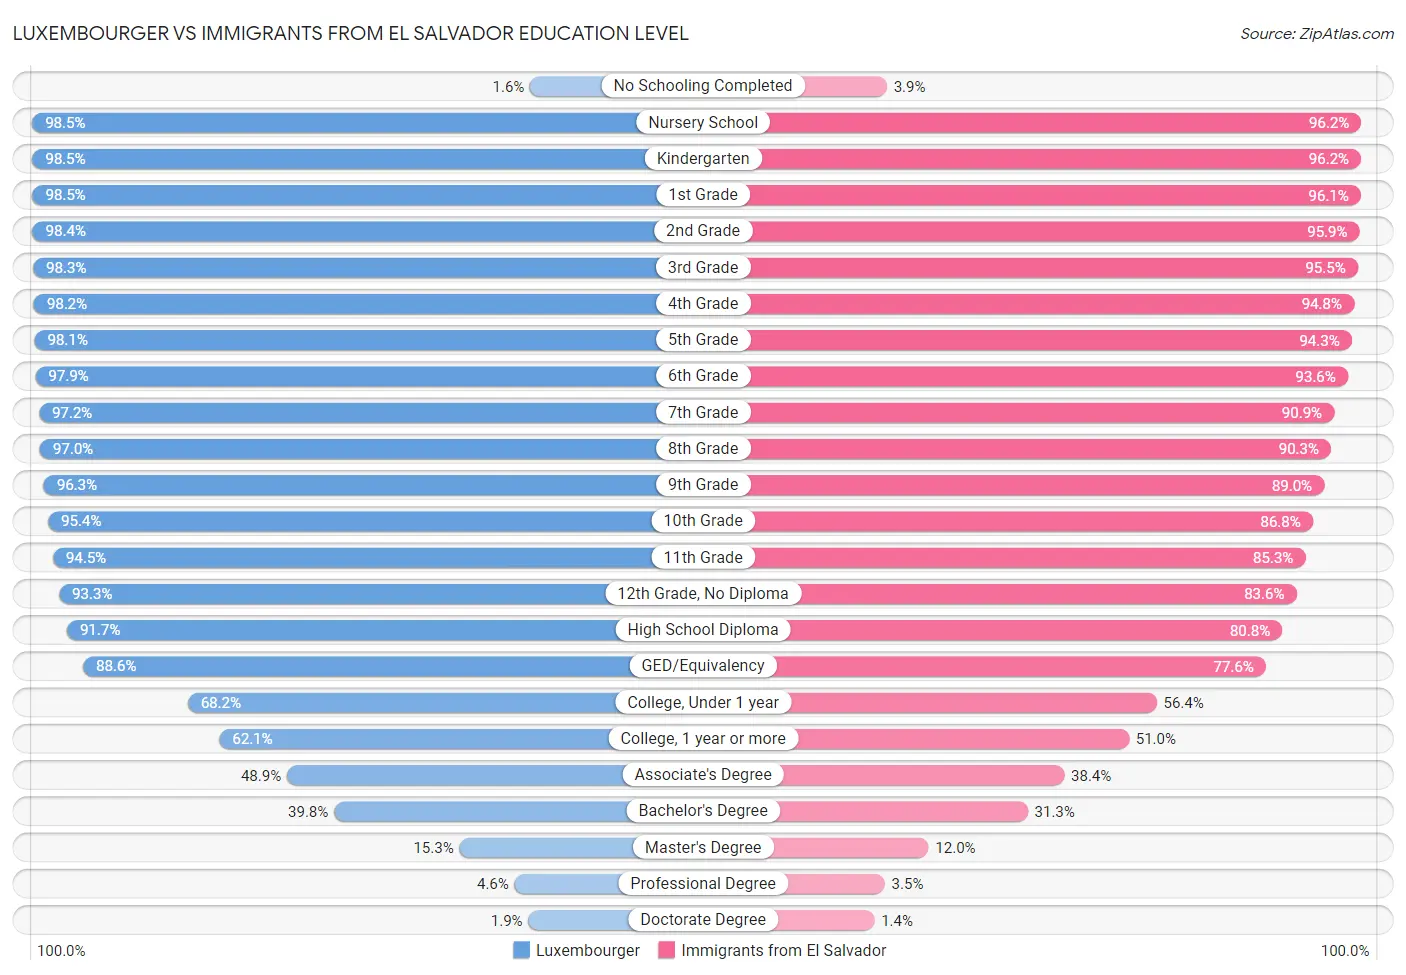 Luxembourger vs Immigrants from El Salvador Education Level